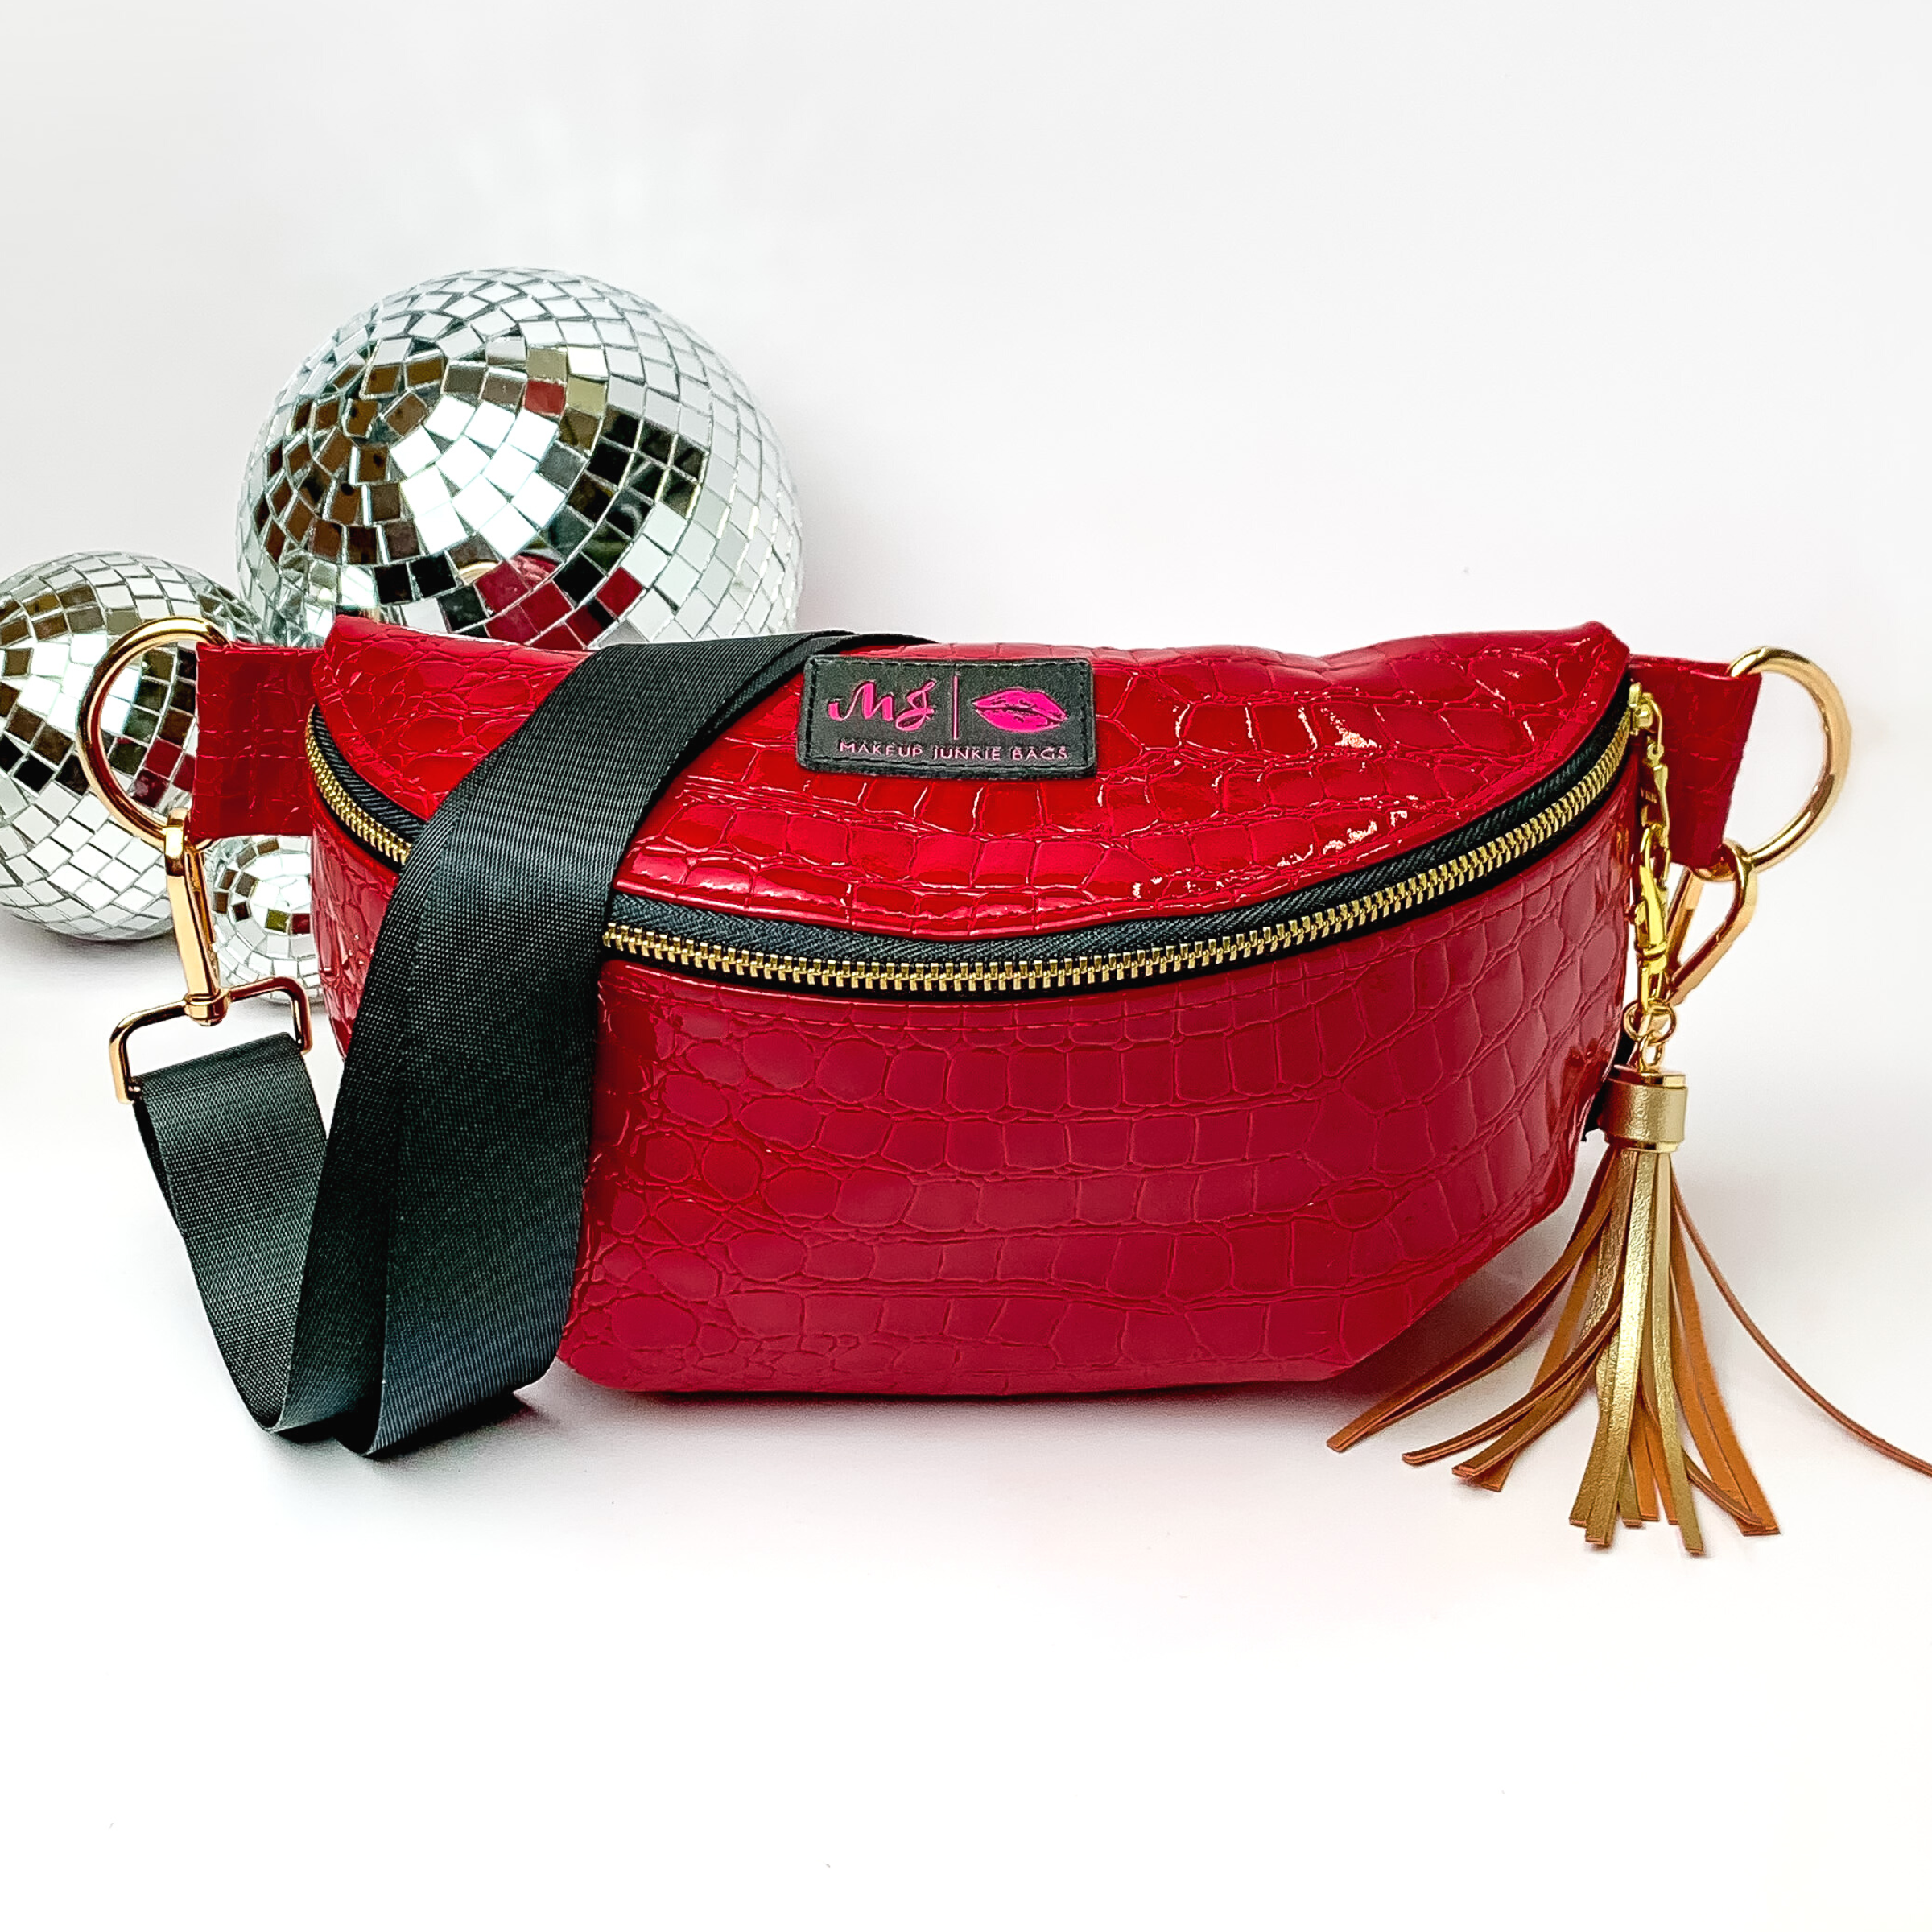 Cherry red, croc print fanny pack with a black strap. This bag includes gold accents, a gold zipper, and a gold tassel. This bag also has a pink stitched logo for Makeup Junkie. This fanny pack is pictured on a white background in front of disco balls. 